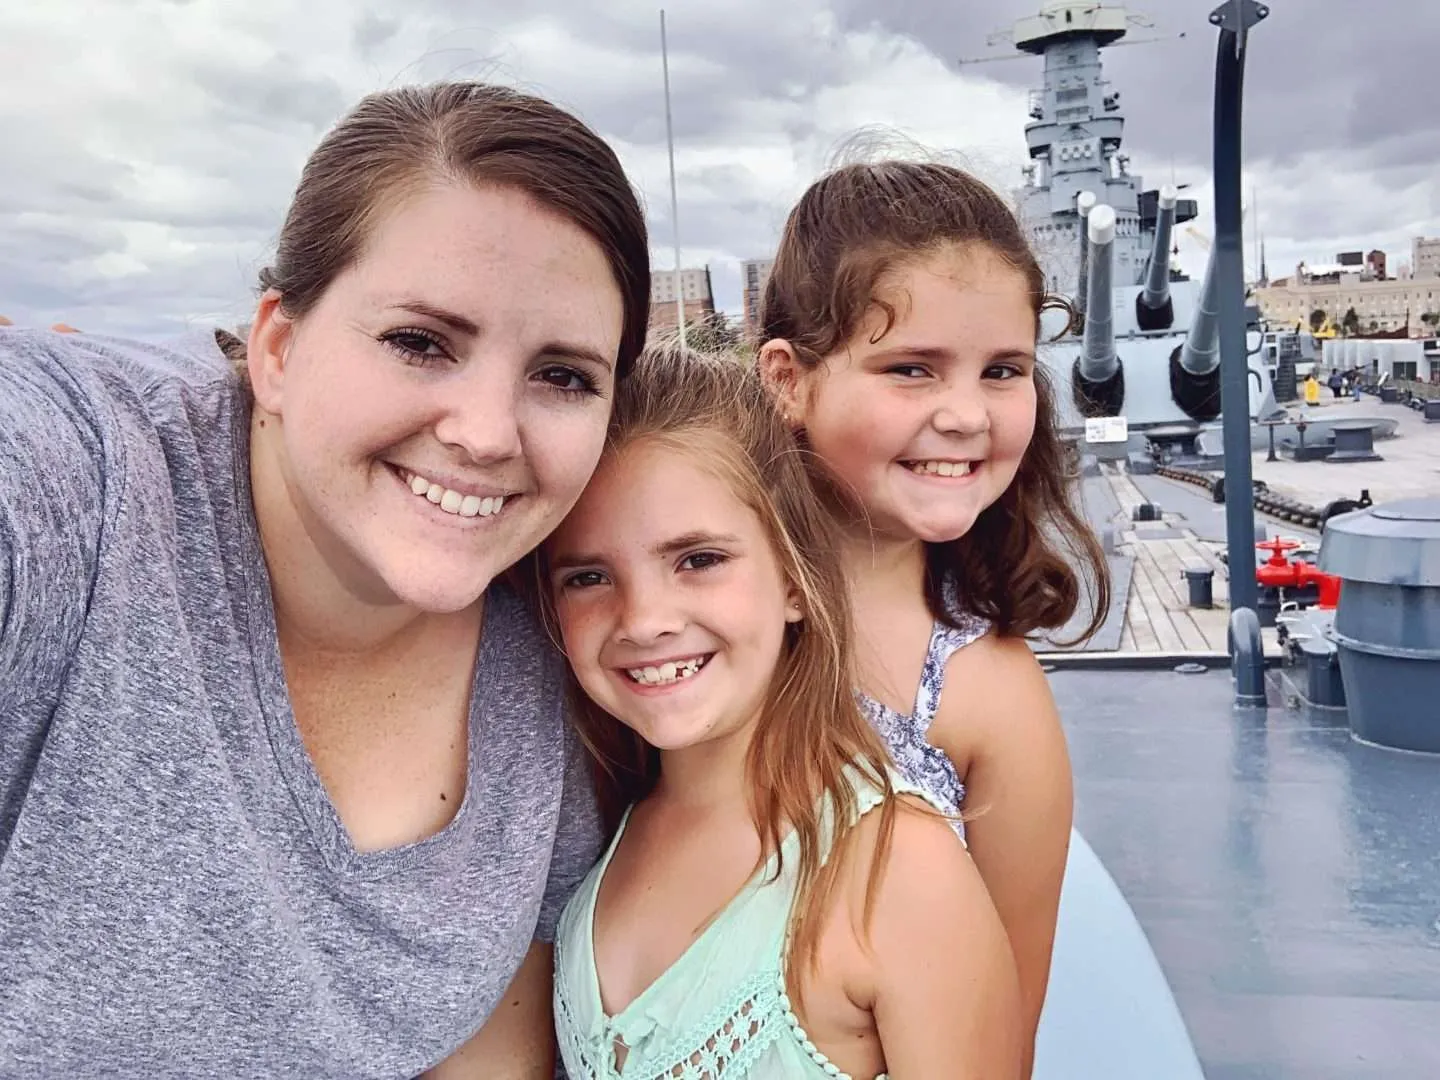 Our visit to Wilmington, NC included a visit to the battleship.